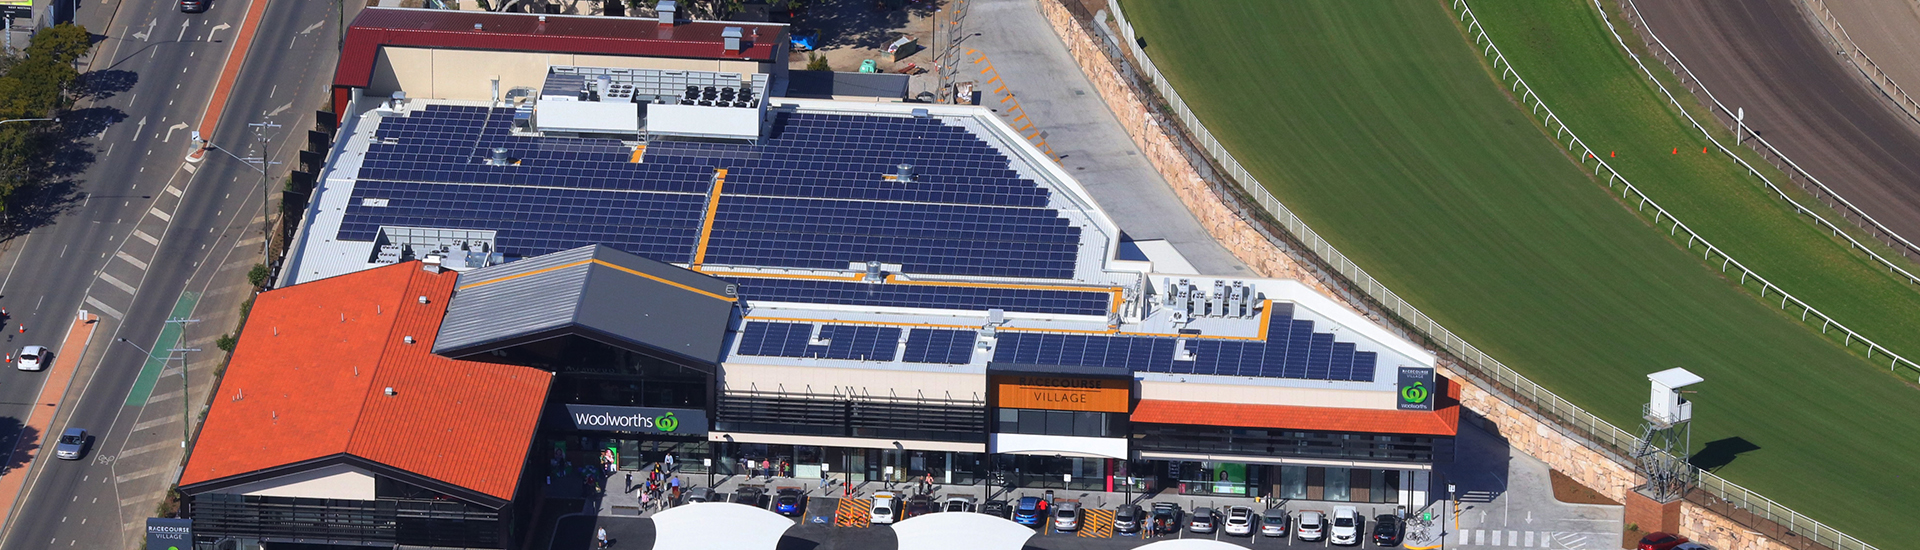 Racing into a Sustainable Future for Brisbane | Brisbane Racing Club 